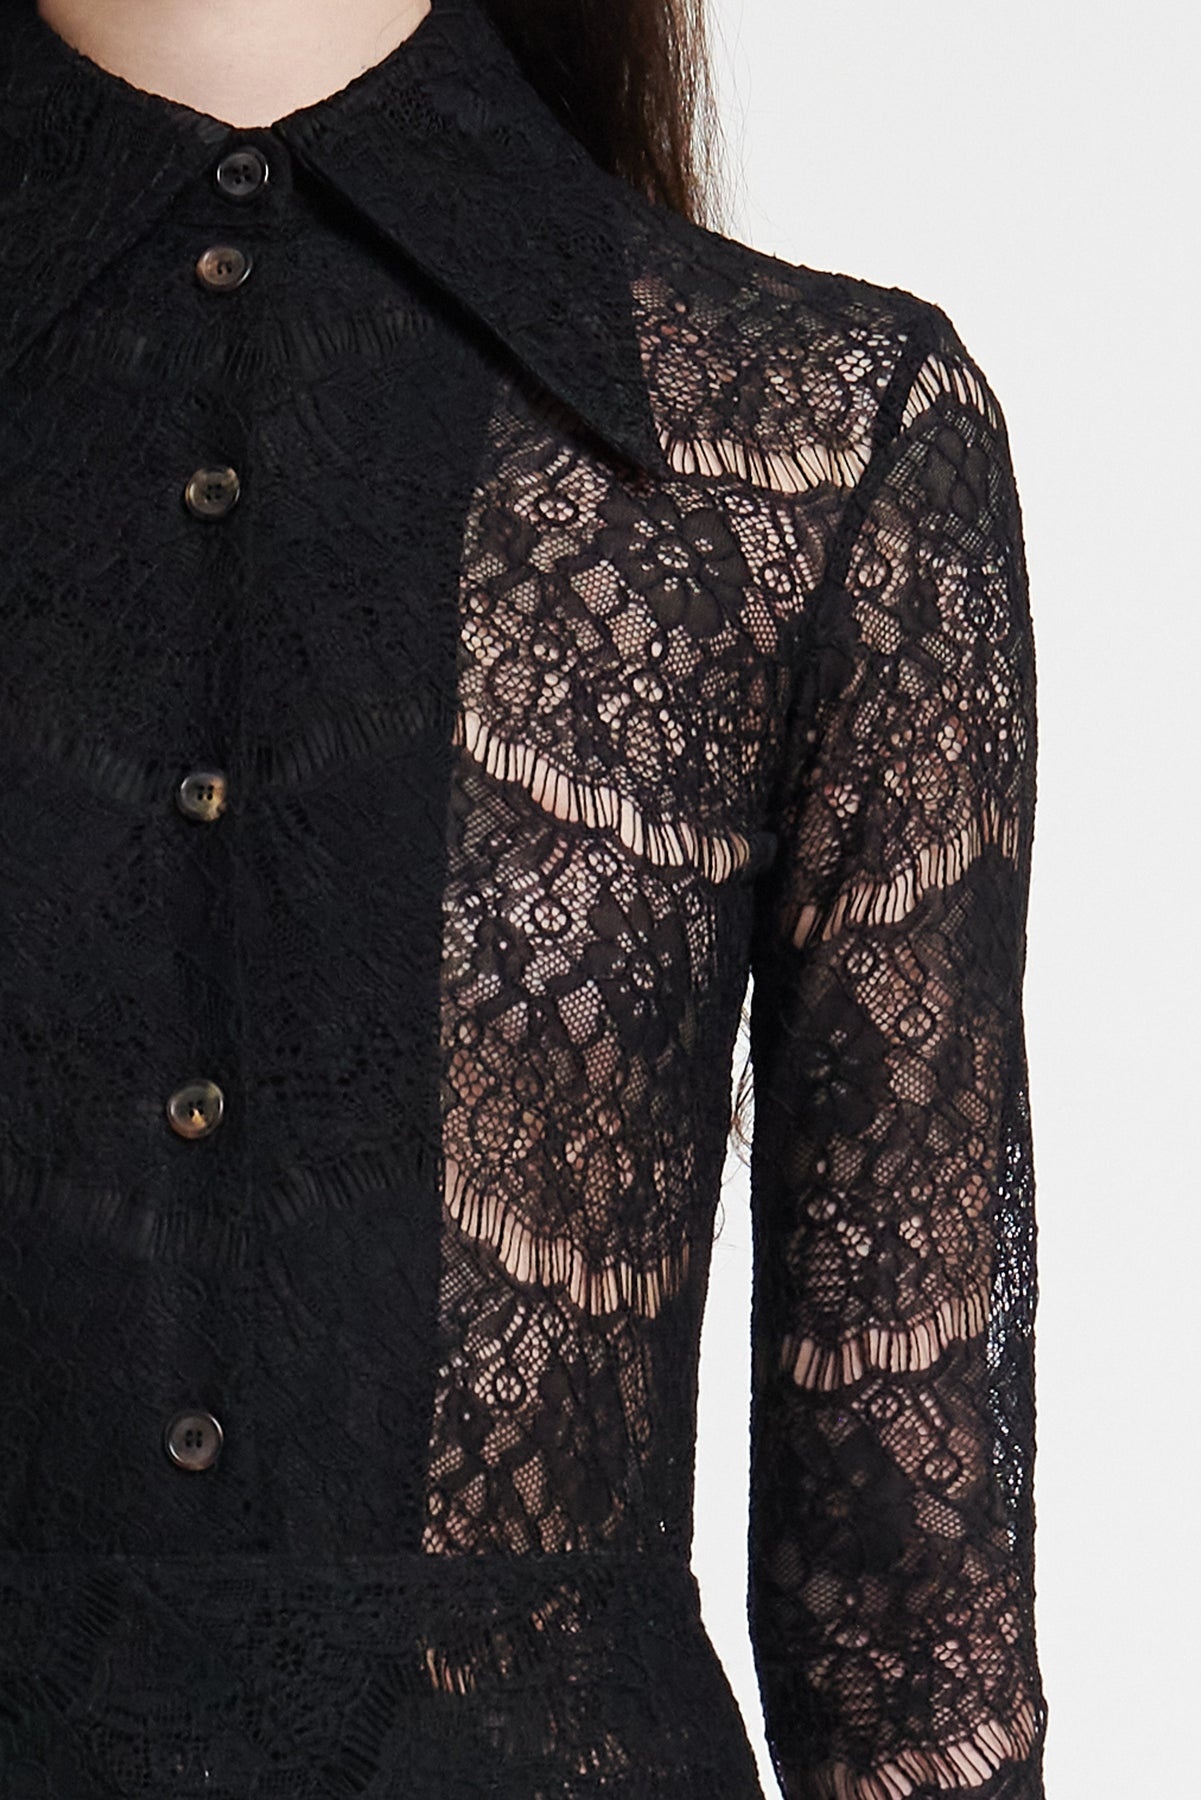 FITTED LACE SHIRT BLACK - 7